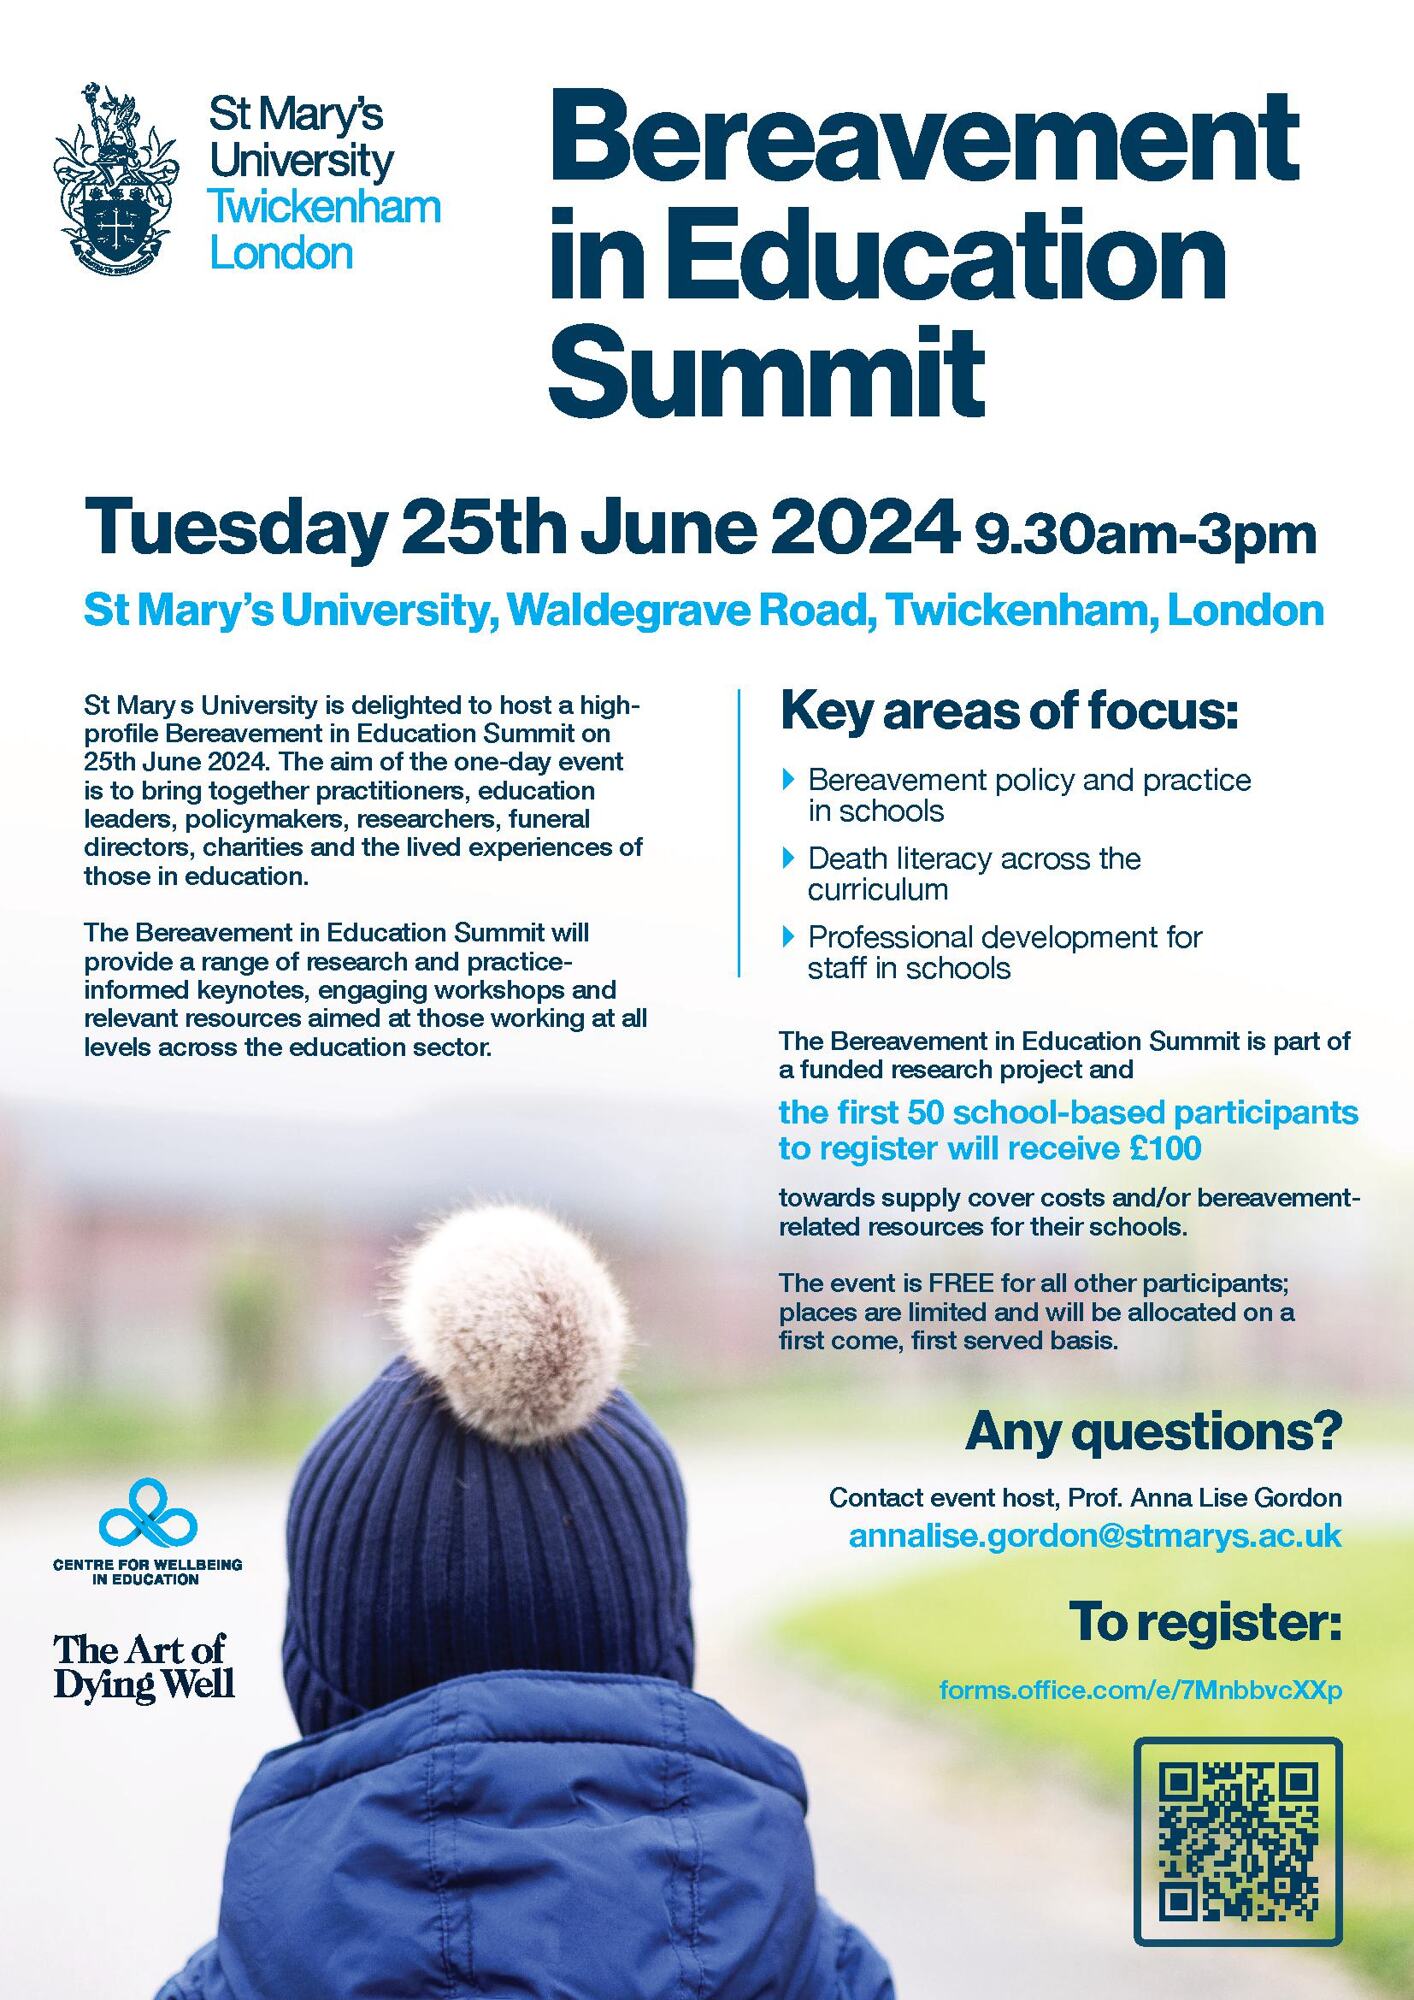 BEREAVEMENT IN EDUCATION SUMMIT POSTER 57370908 1